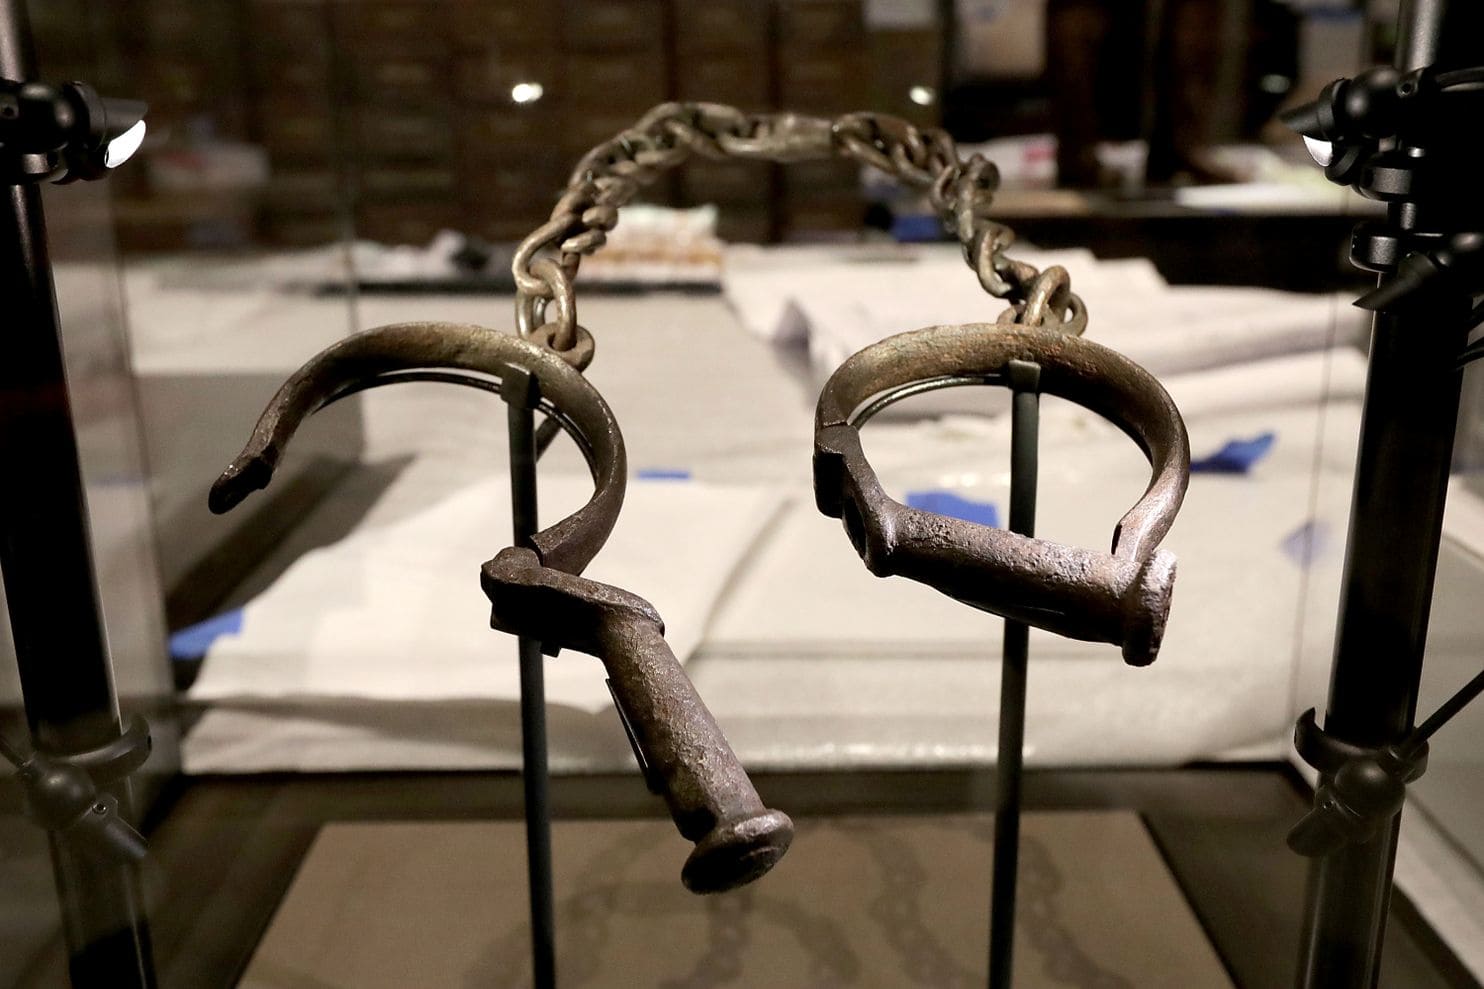 Shackles on display at the Smithsonian’s National Museum of African American History and Culture.